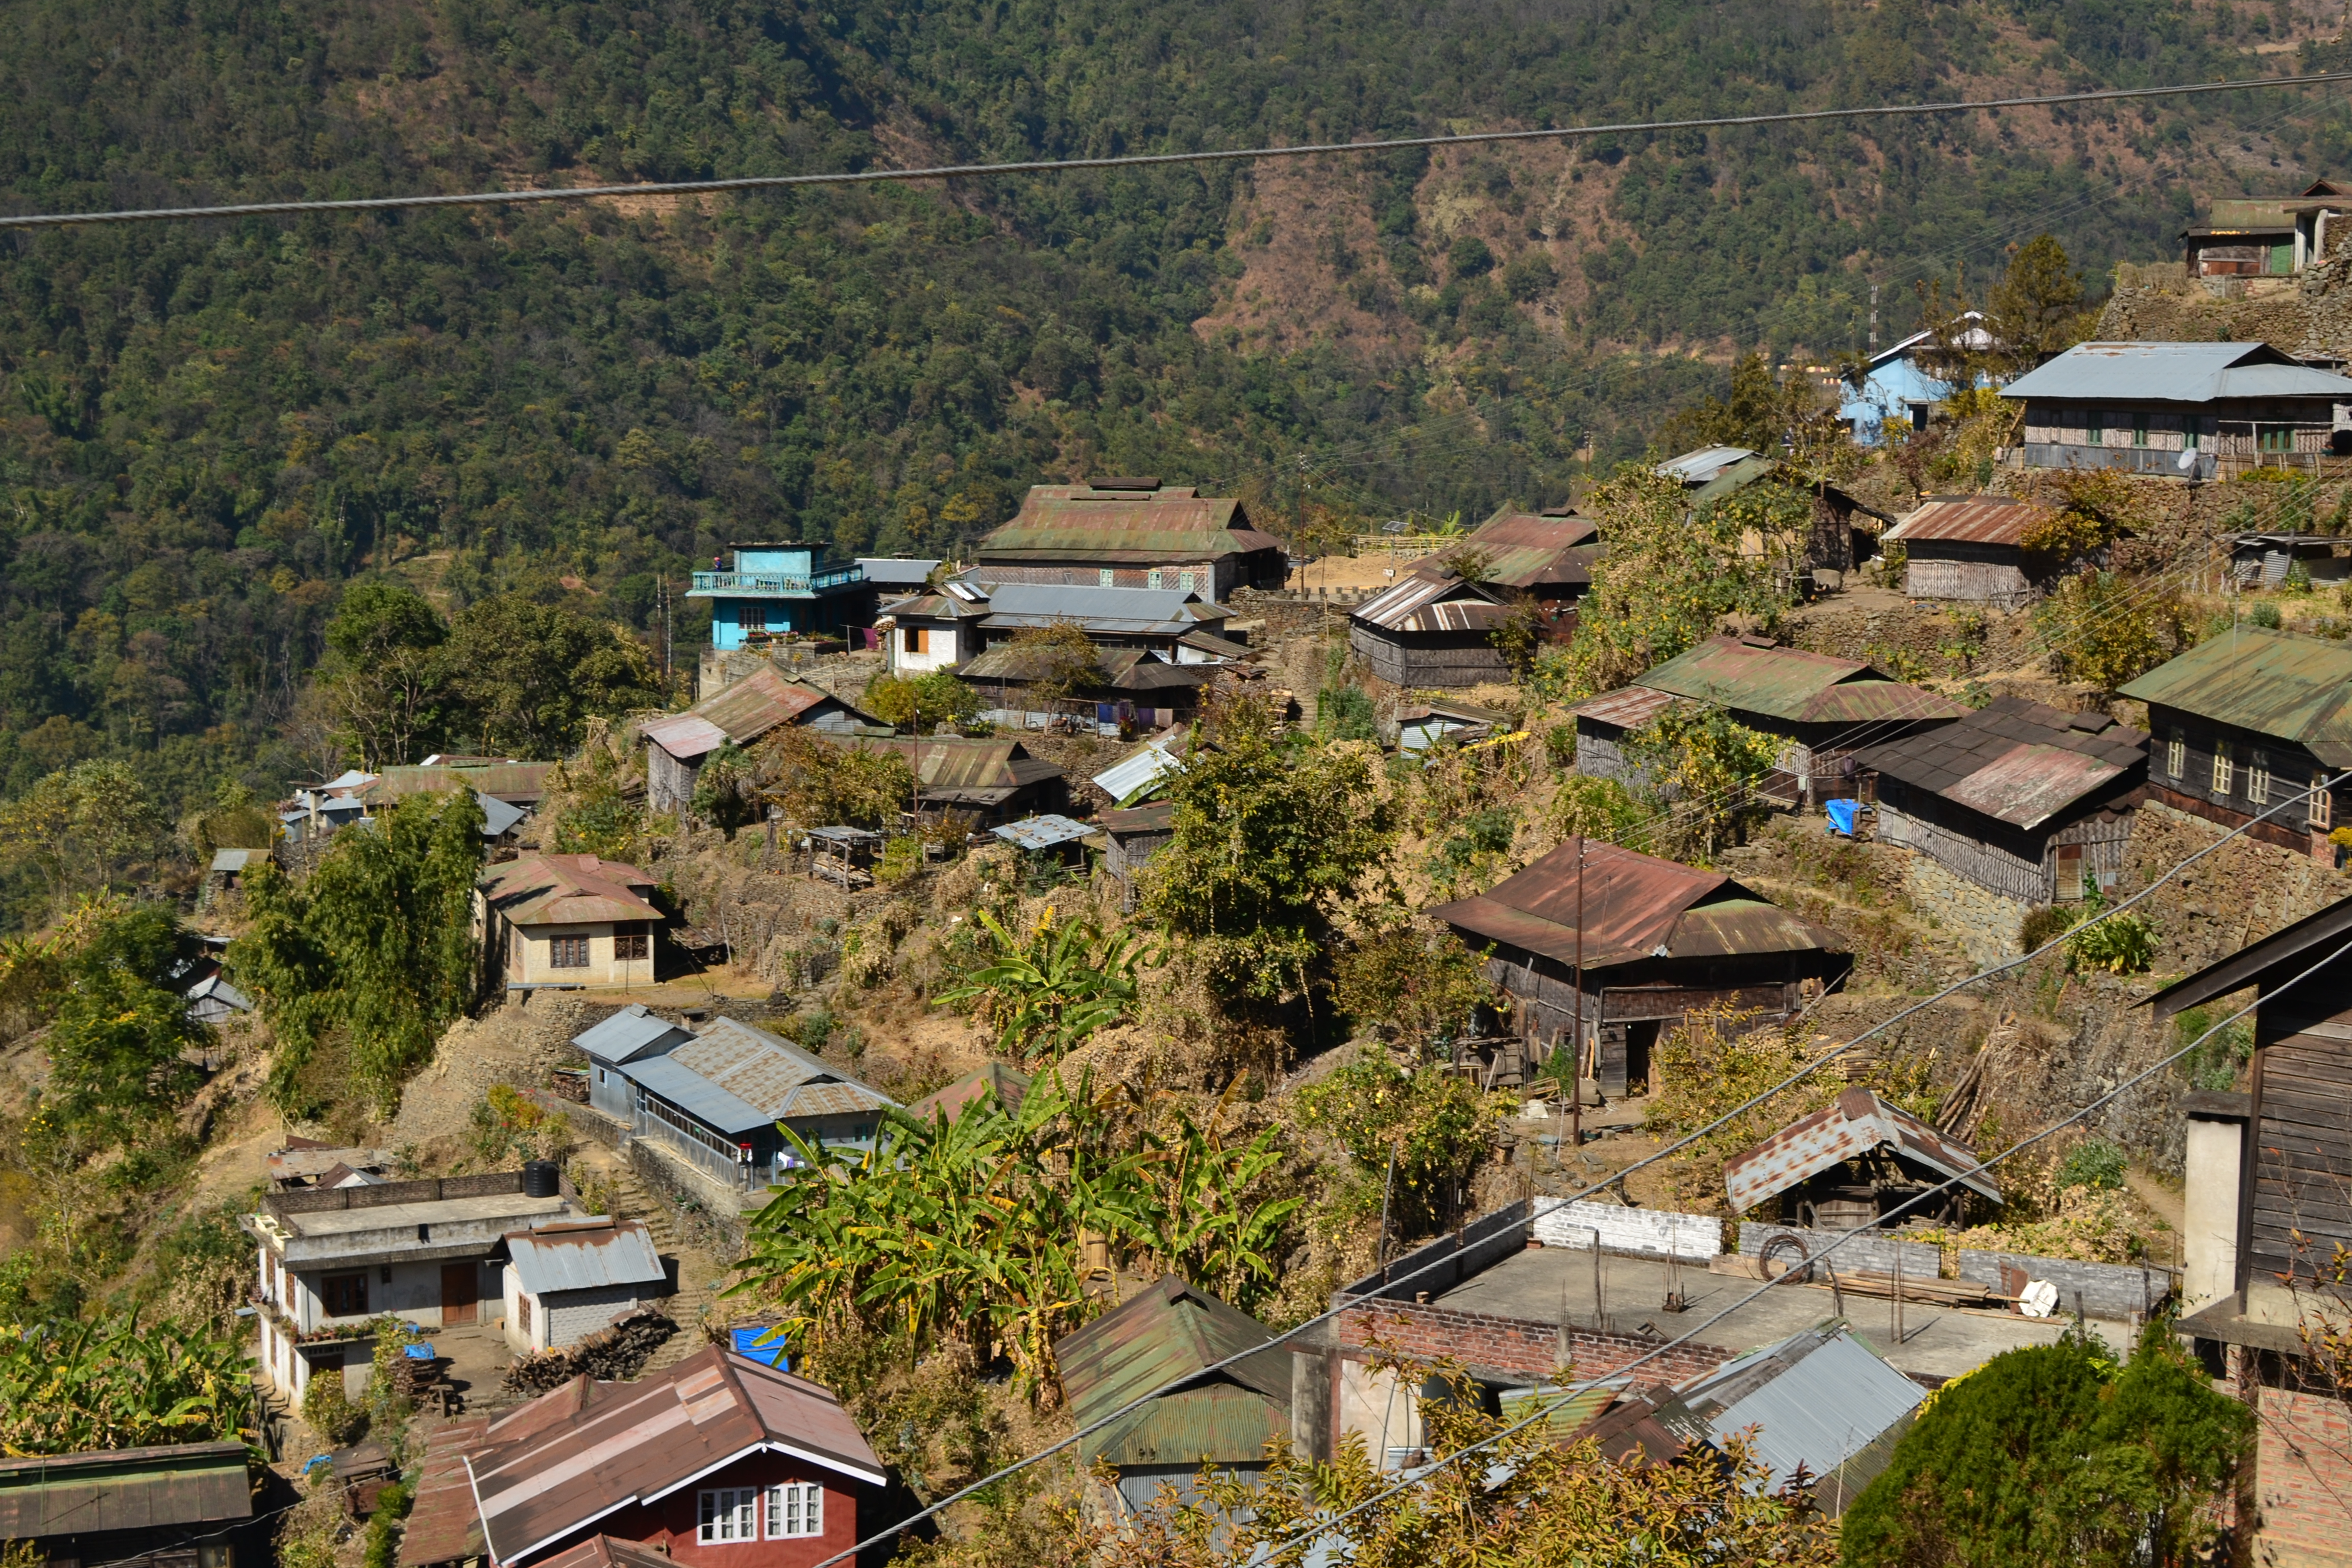 The Tiny houses by the Eastern Himalayan Terrain